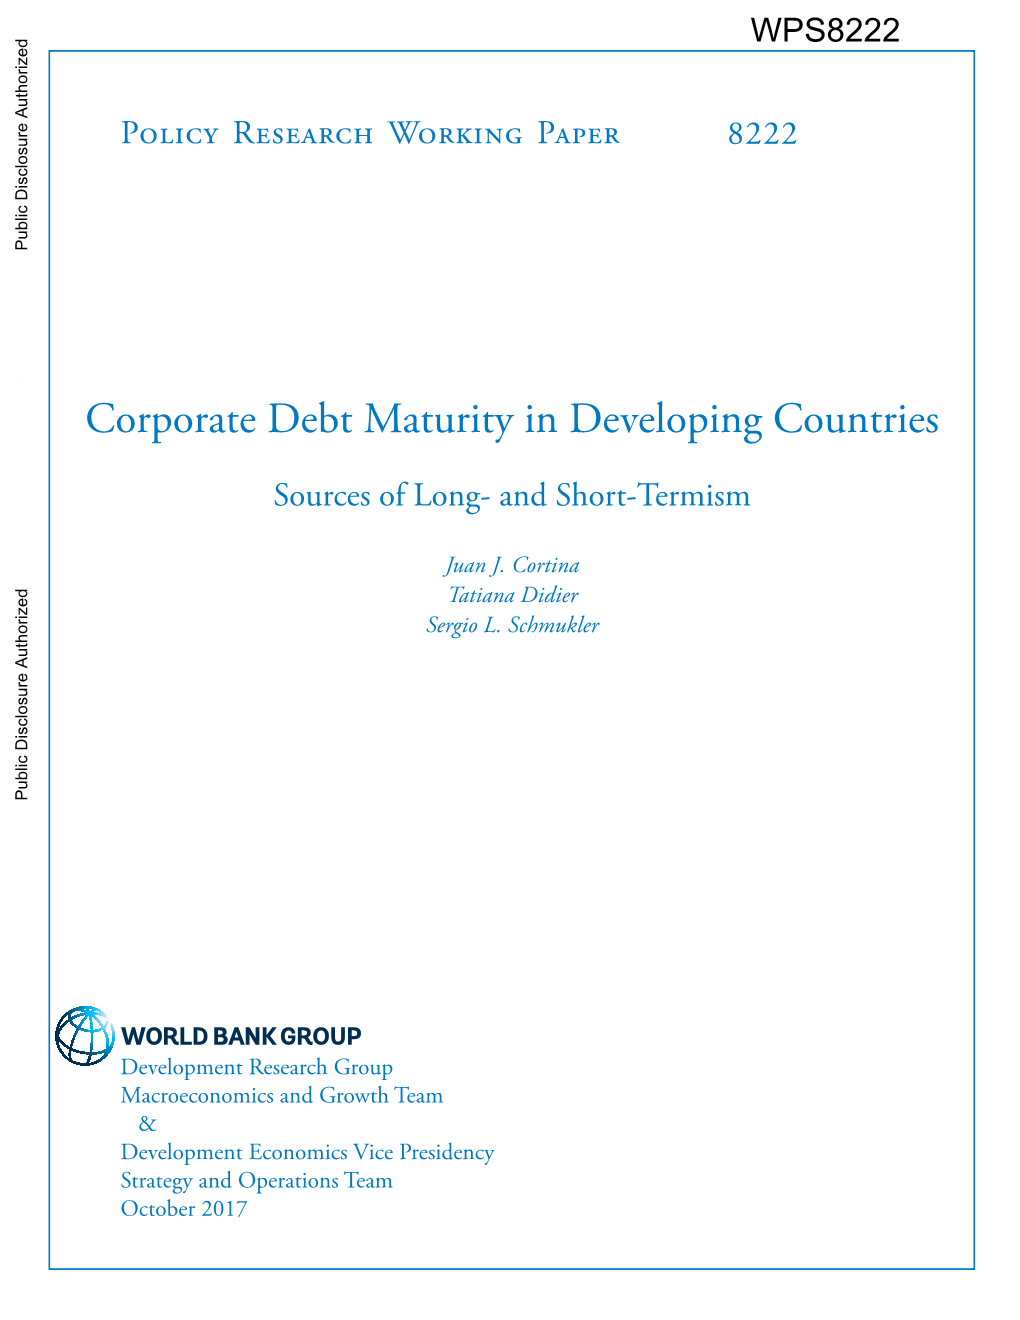 Corporate Debt Maturity in Developing Countries